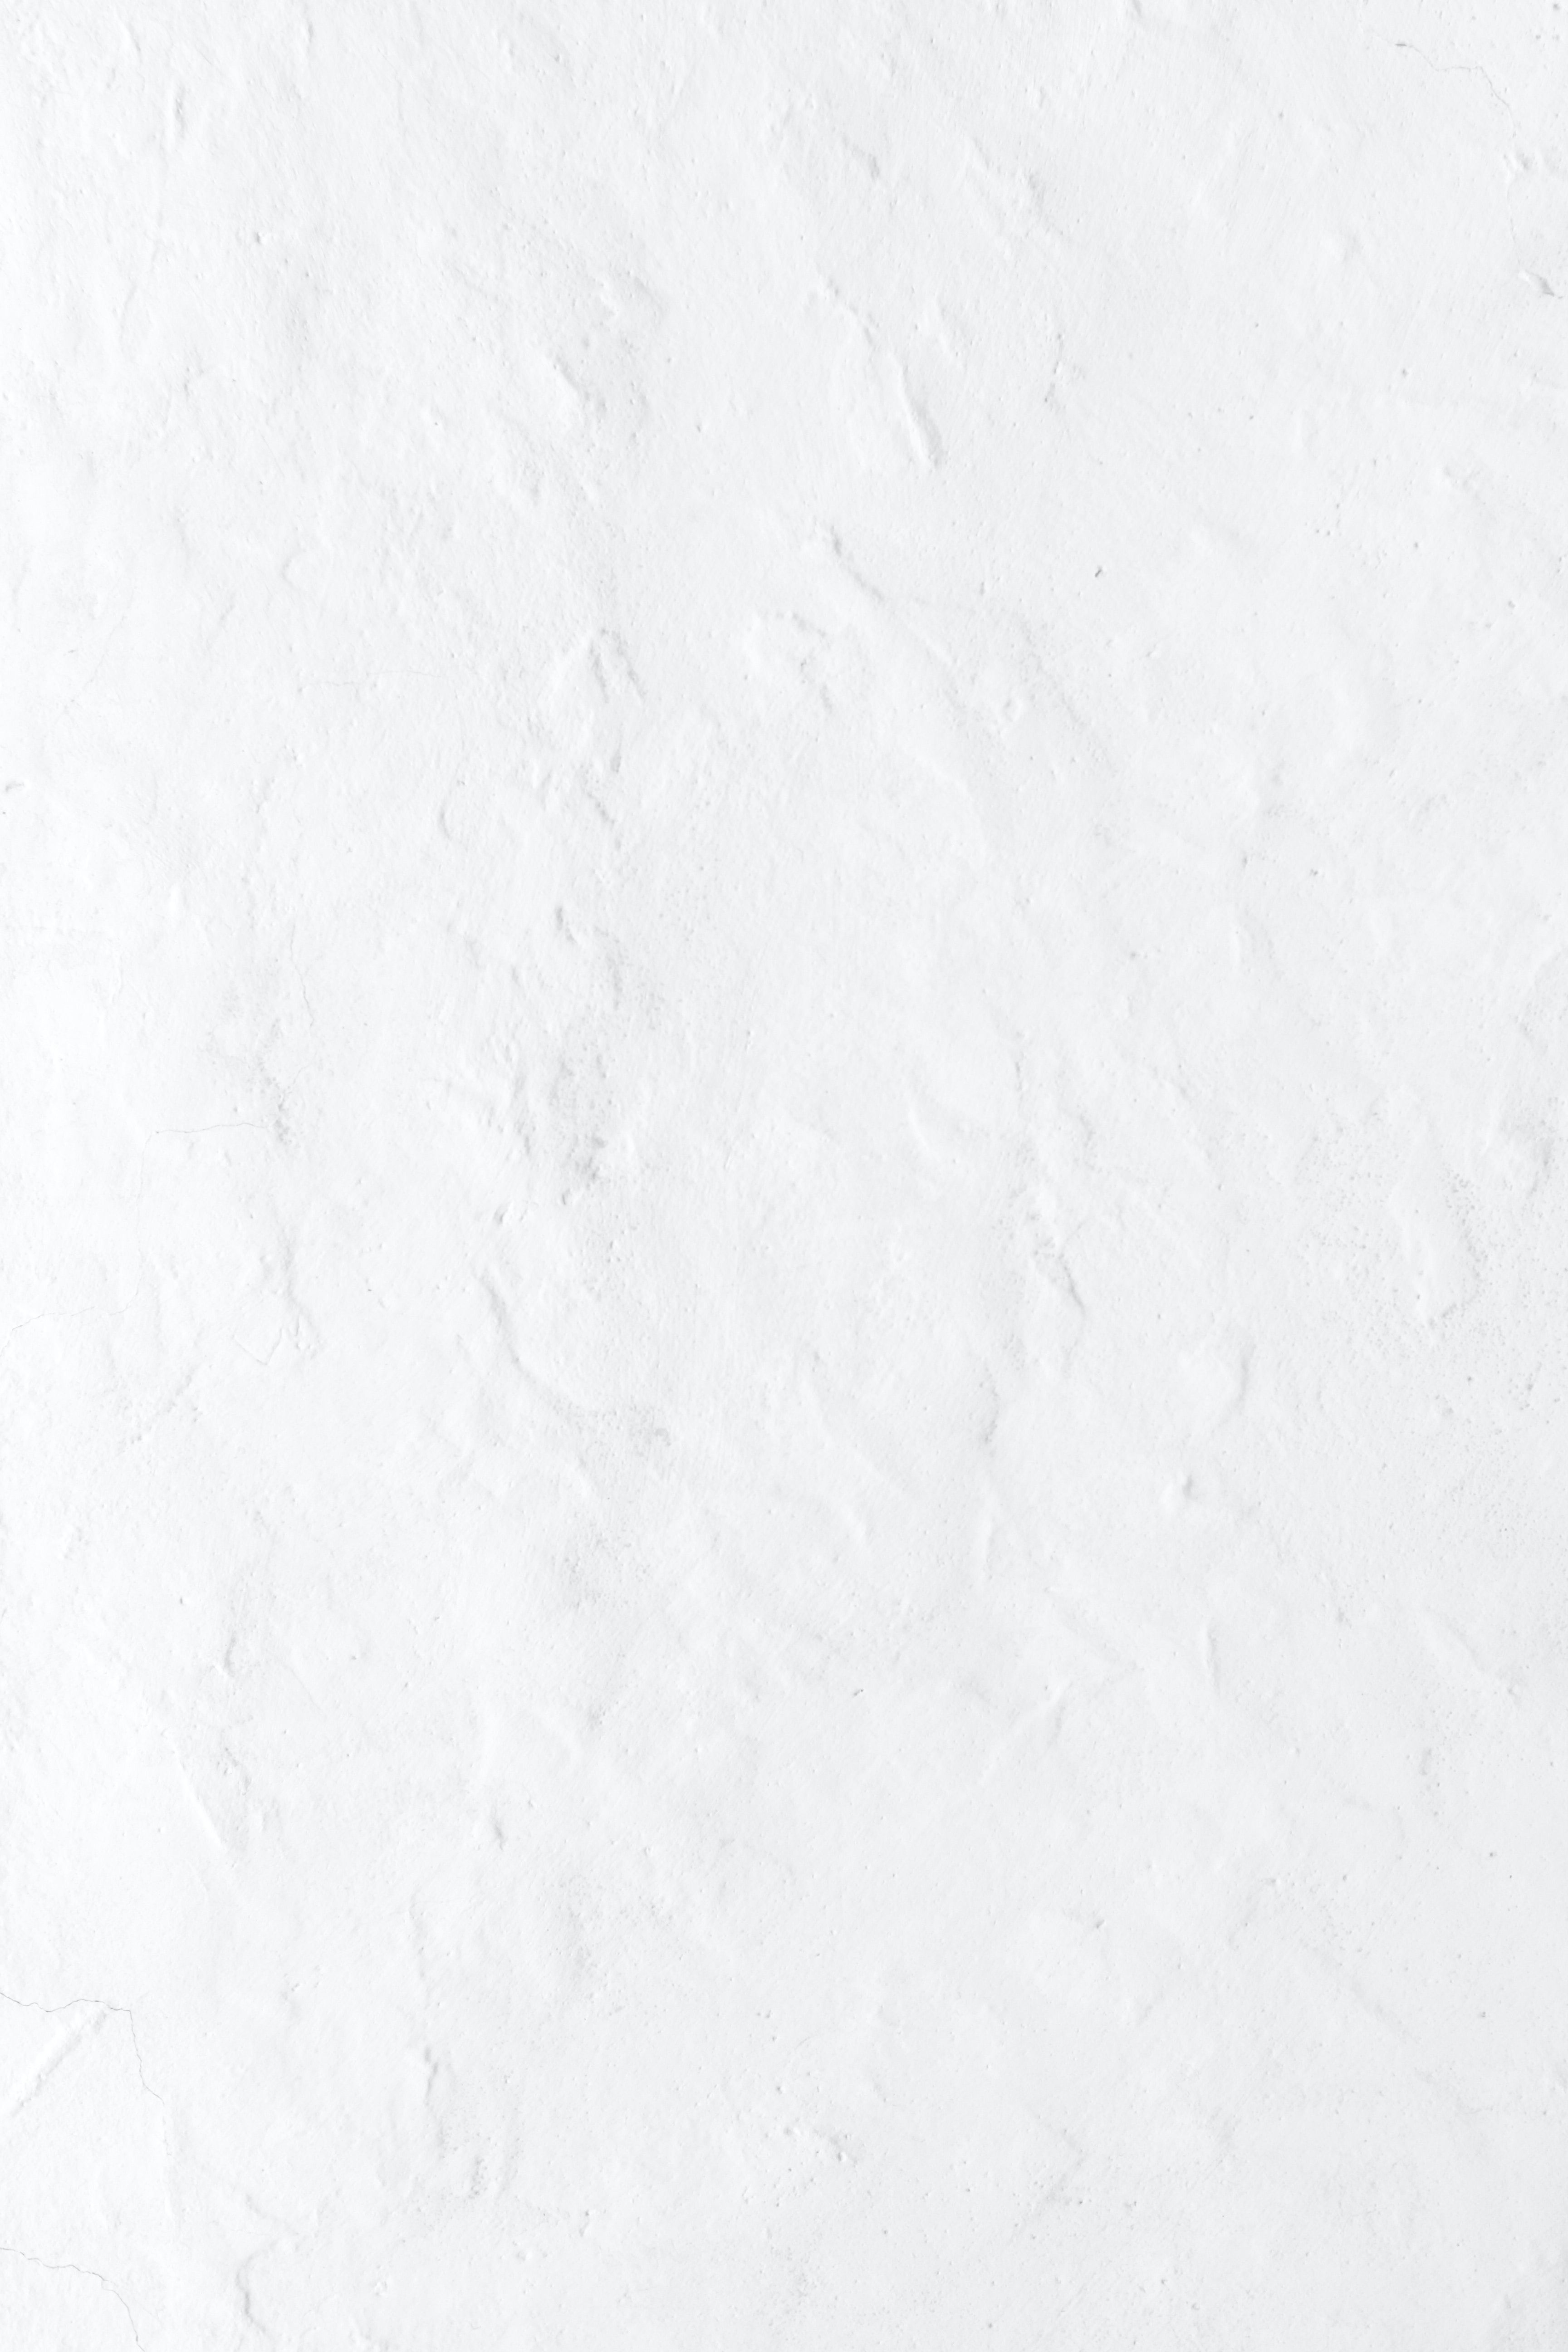 Plain White iPhone Wallpapers - Wallpaper Cave